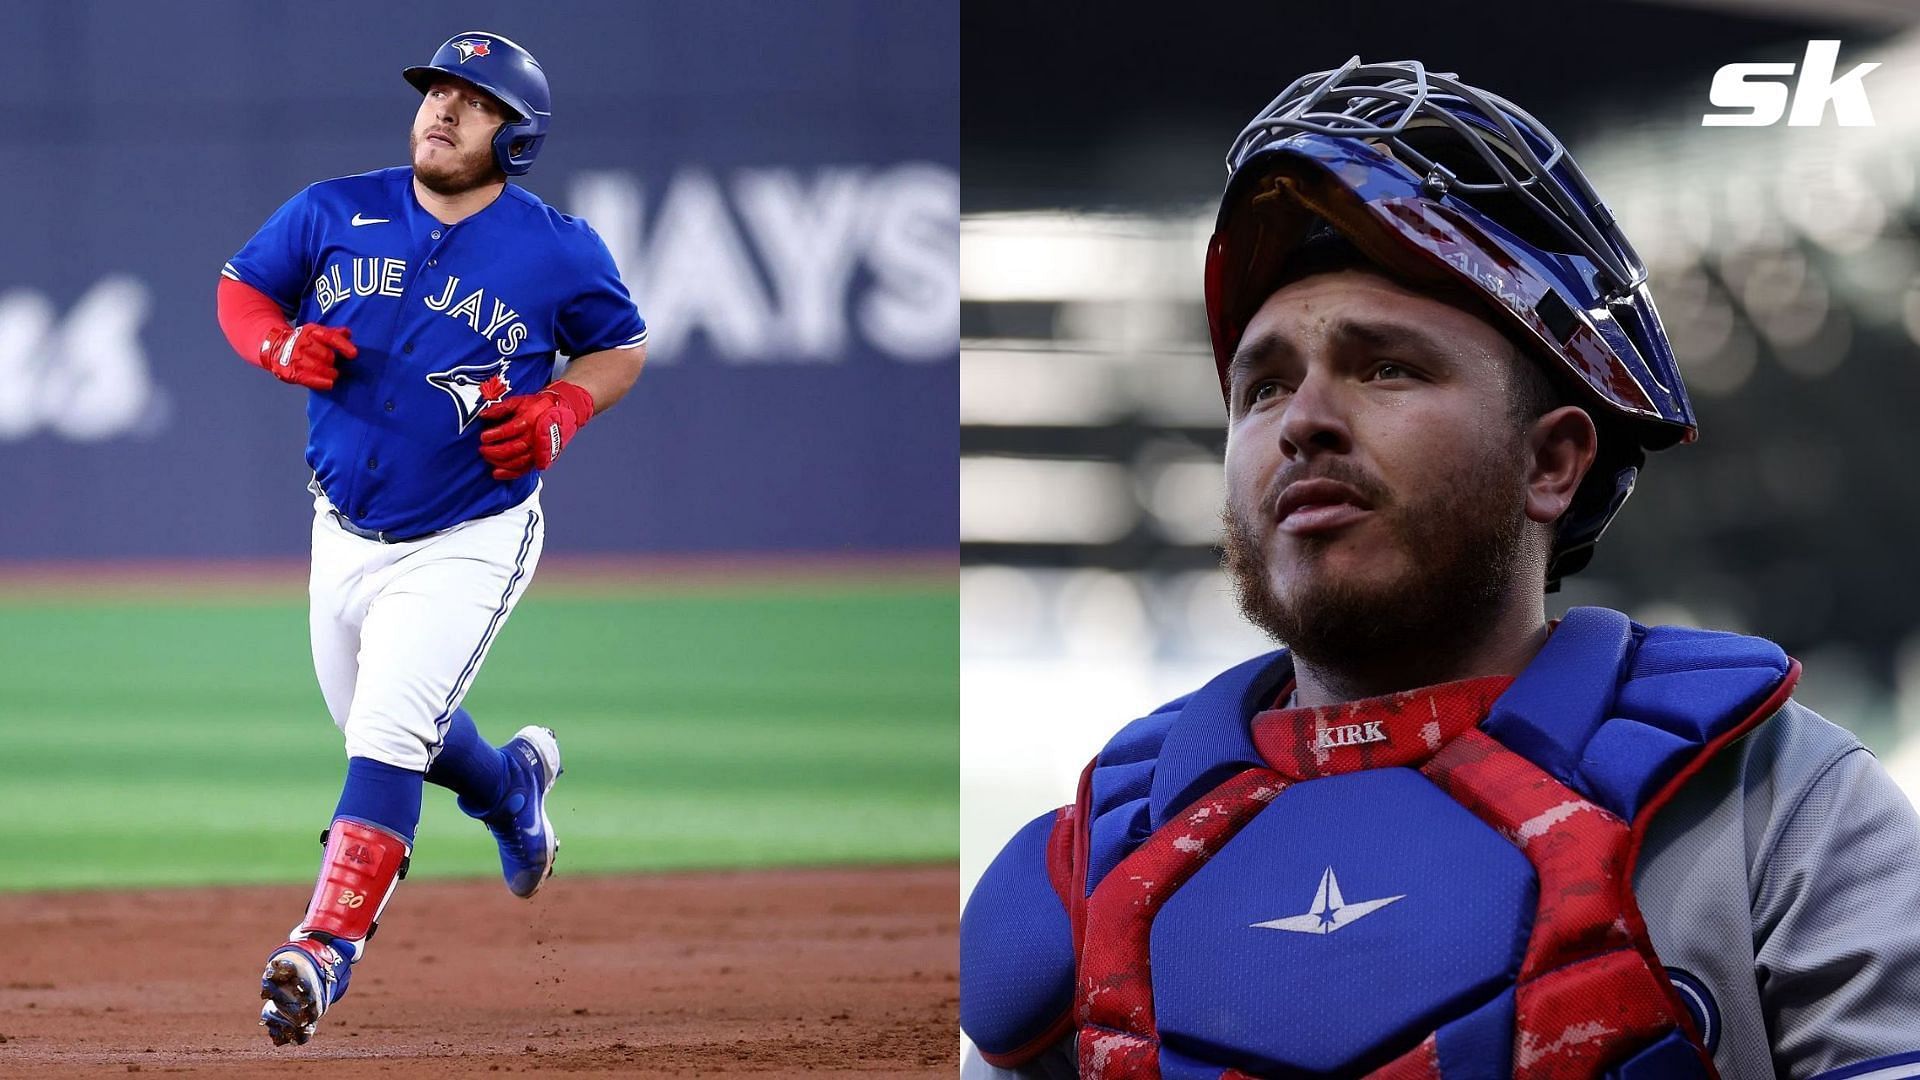 Alejandro Kirk injury update: Alejandro Kirk Injury Update: Health status  and recovery time for Toronto Blue Jays star catcher placed on IL